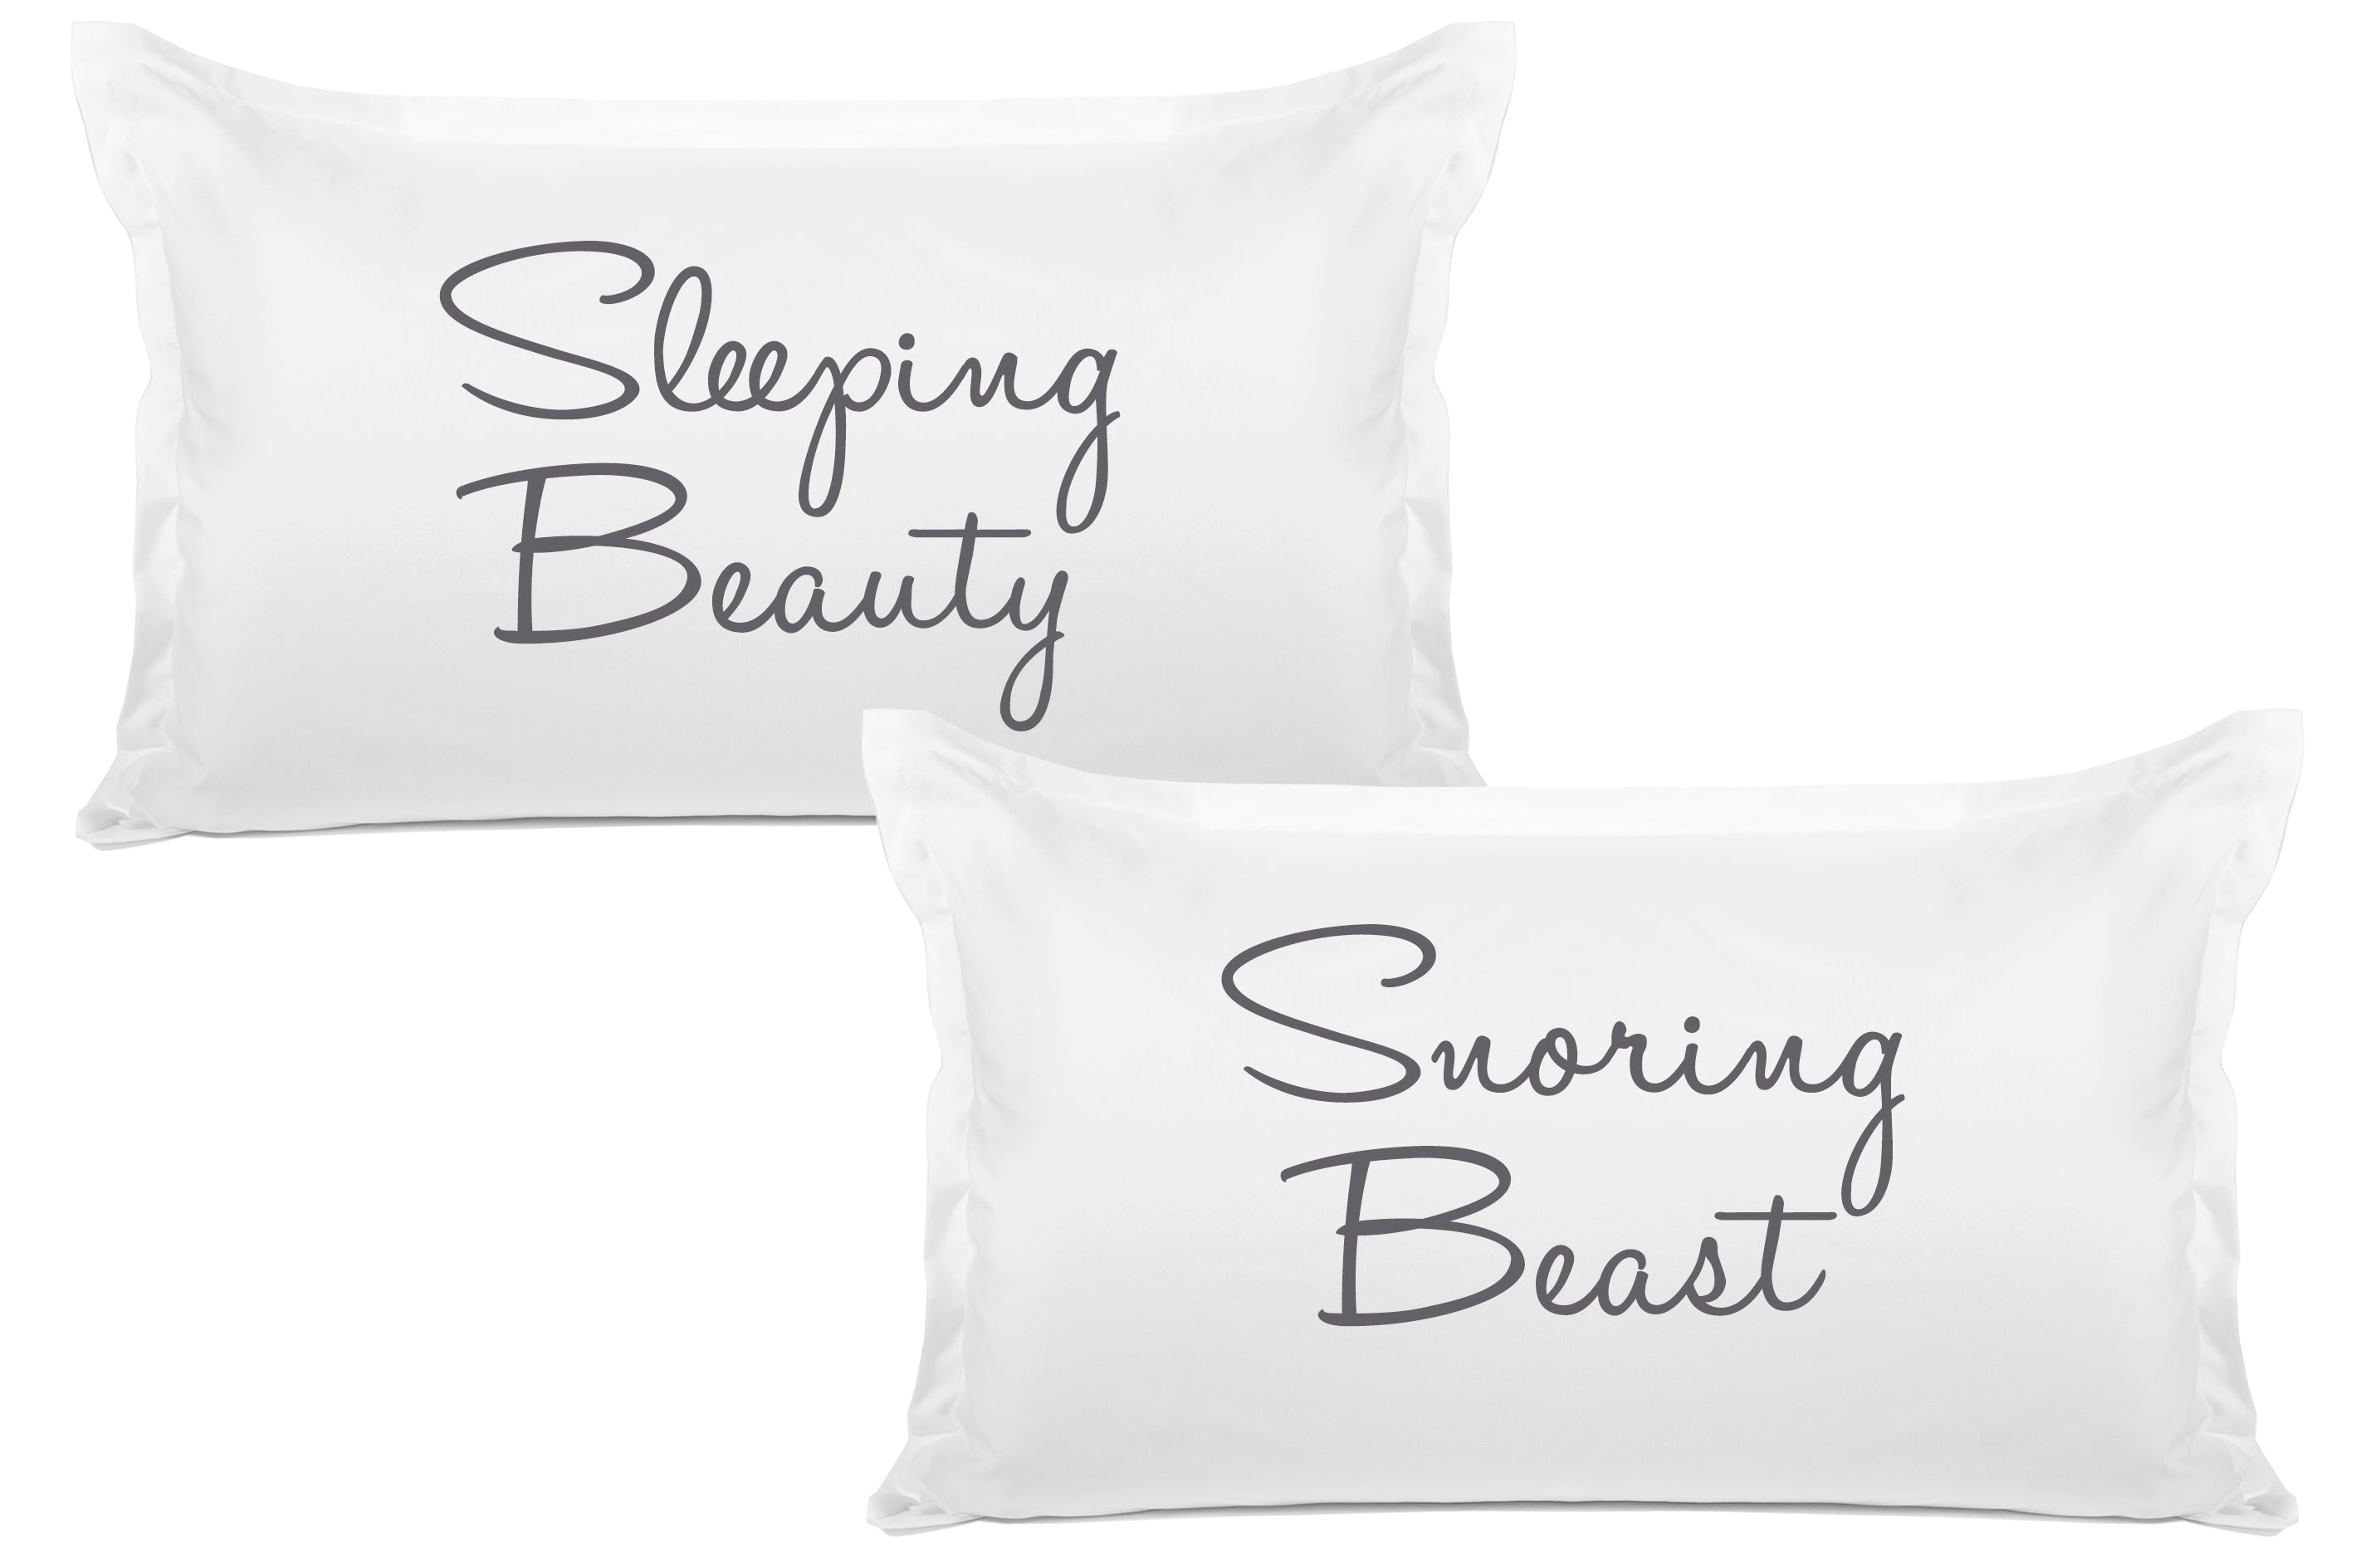 Sleeping Beauty, Snoring Beast - His & Hers Pillowcase Collection-Di Lewis